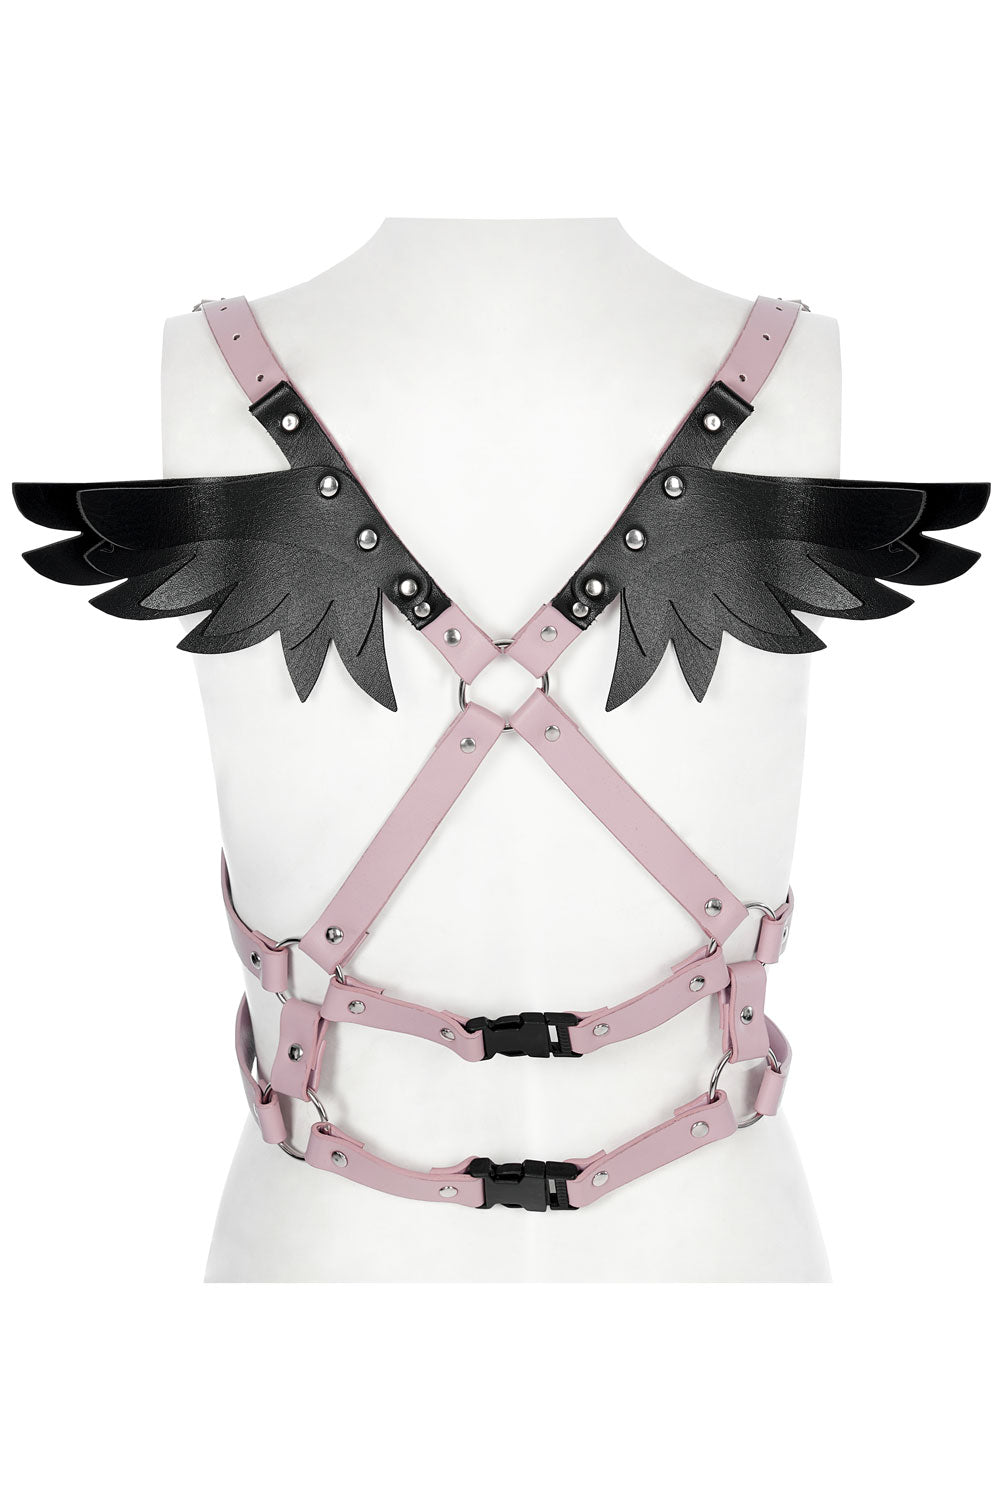 Pastel Goth Wings Harness [BLACK/PINK]